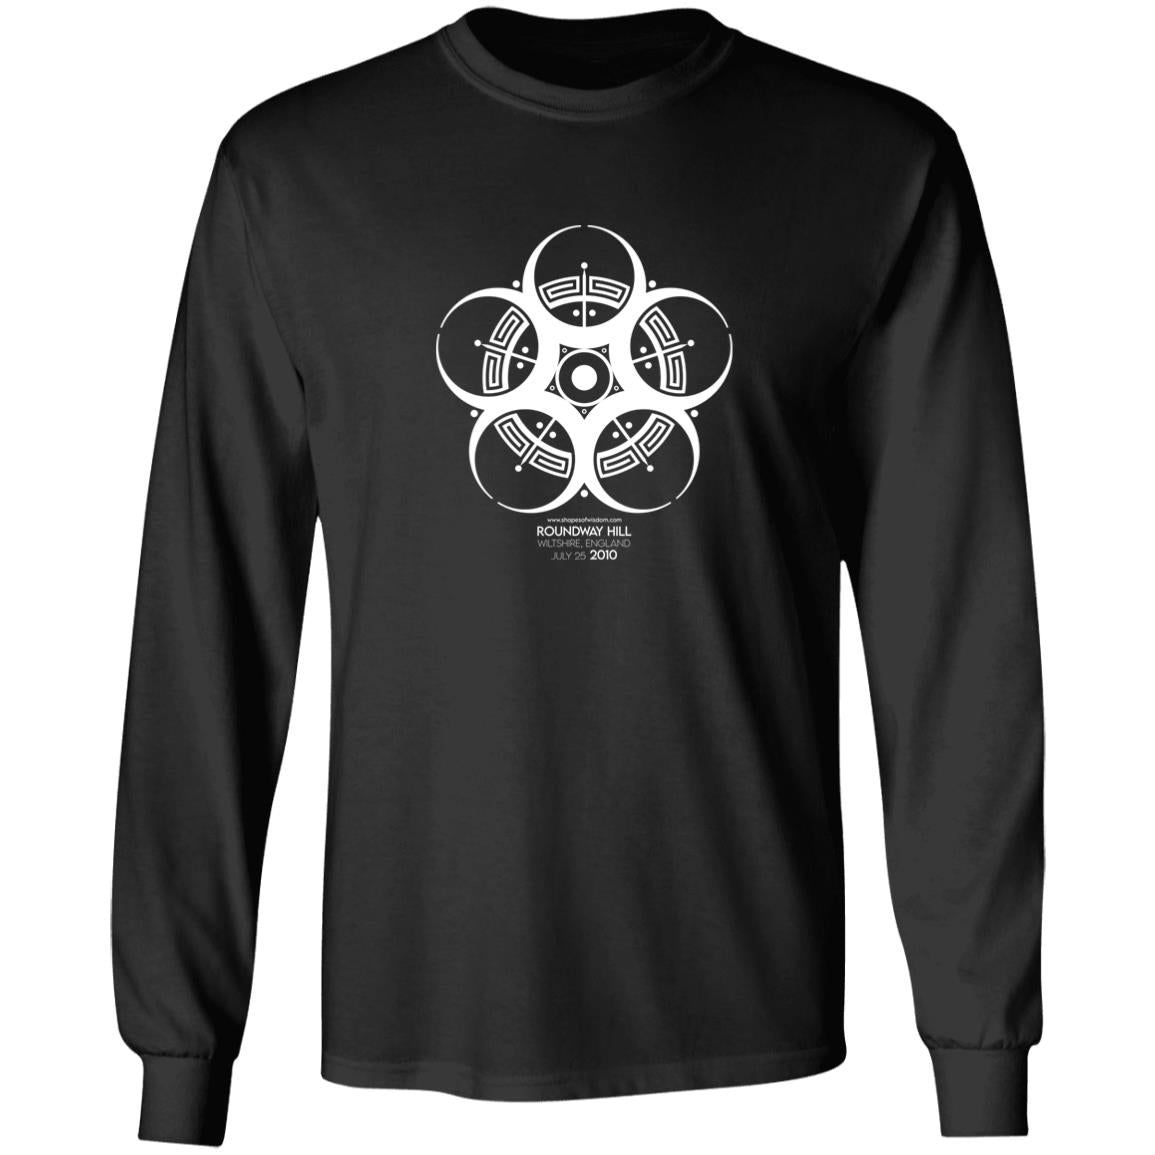 Crop Circle Long Sleeve Tee - Roundway Hill 2